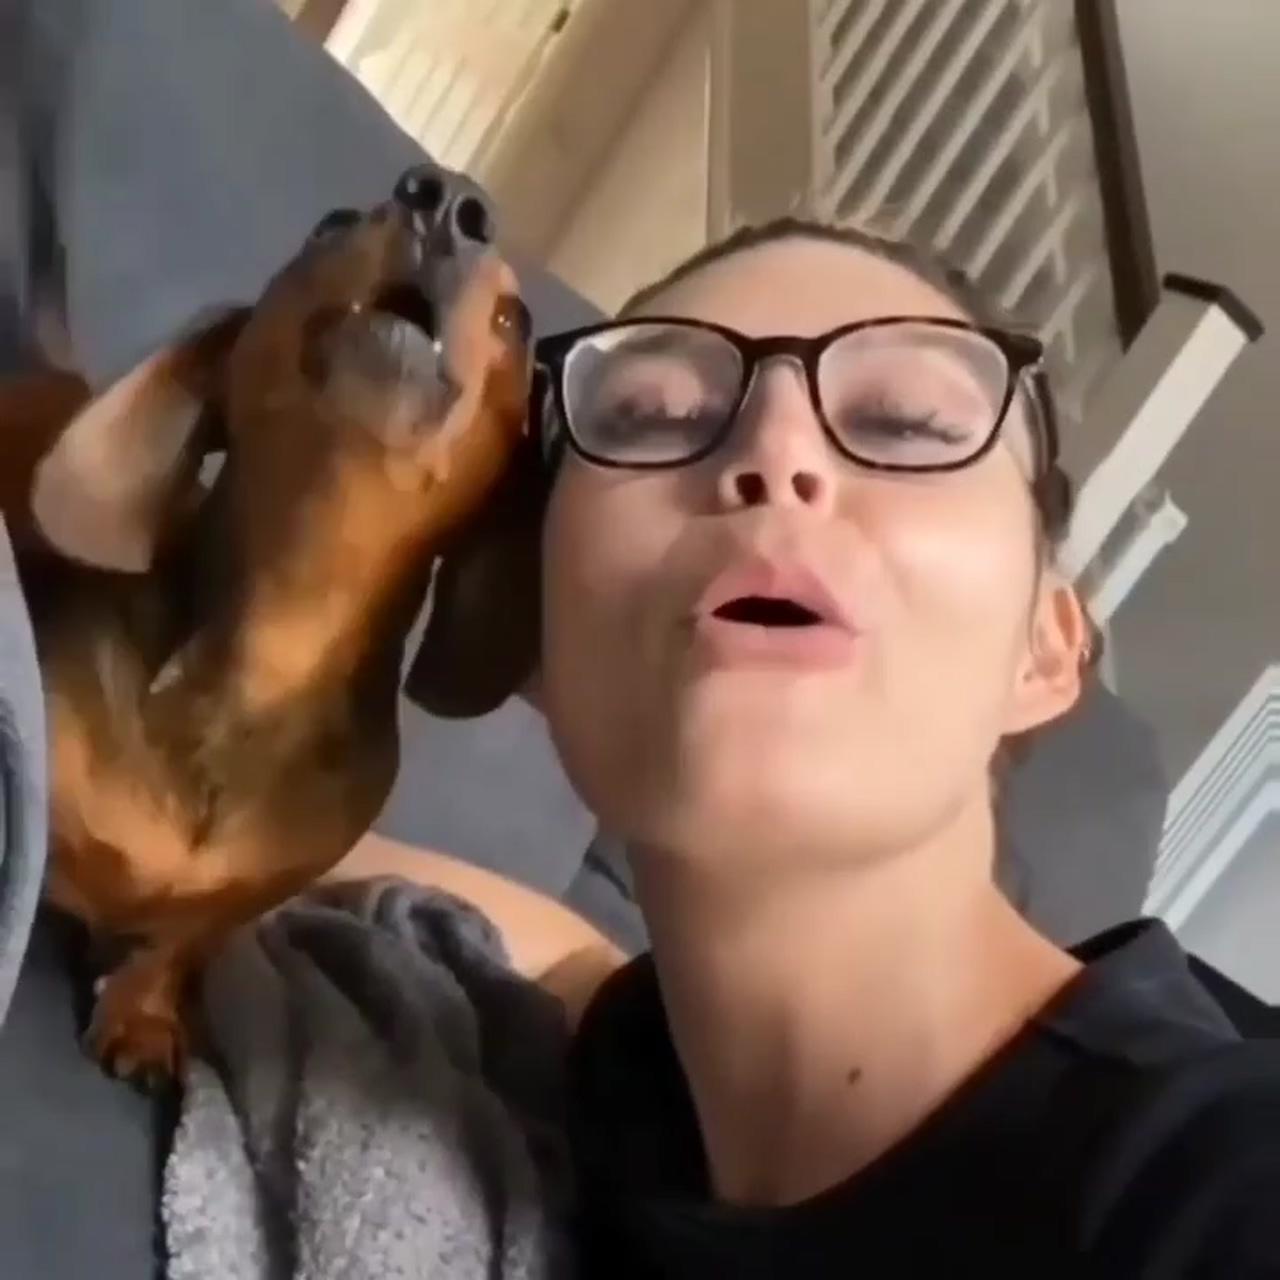 Dachshund funny videos; this is amazing but you're so clever 